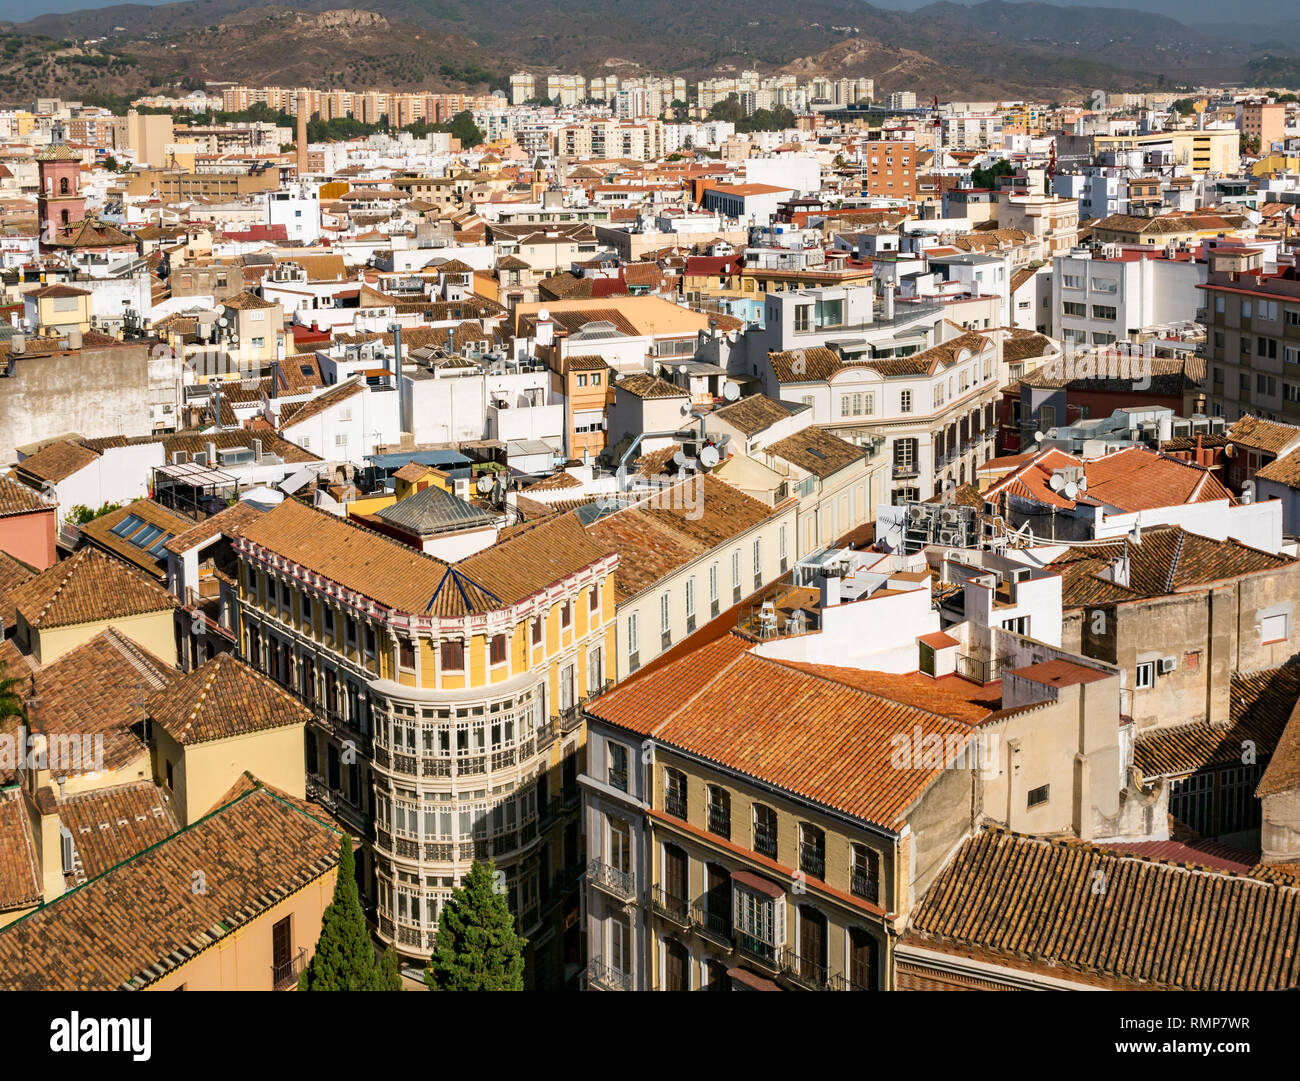 View from above of old houses, corner building and narrow streets, Malaga old town, Andalusia, Spain Stock Photo